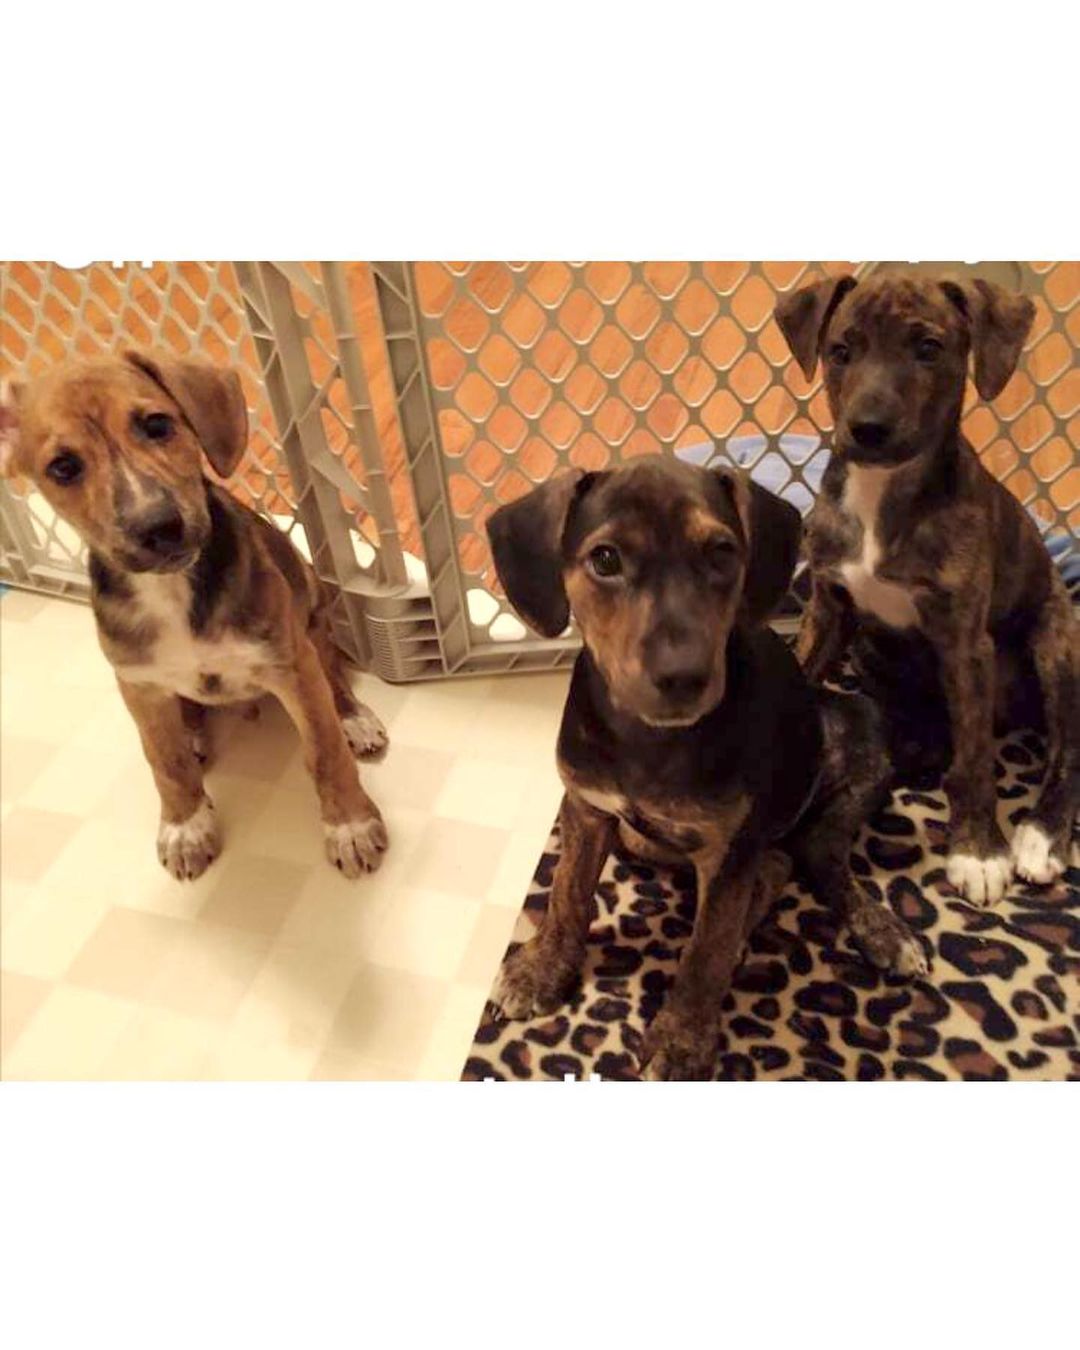 JIF, JELLY, and SKIPPY are ready for their forever homes and well, we are 🥜 for them❤️

These delicious spaniel mix babies are lovable, cuddly, smart, mellow, and, as you can see, adorable. 💕They’re up to date on shots, chipped, and dewormed— now they just need to find their other halves! 🥪 

Interested? Contact us at reboundhounds@gmail.com